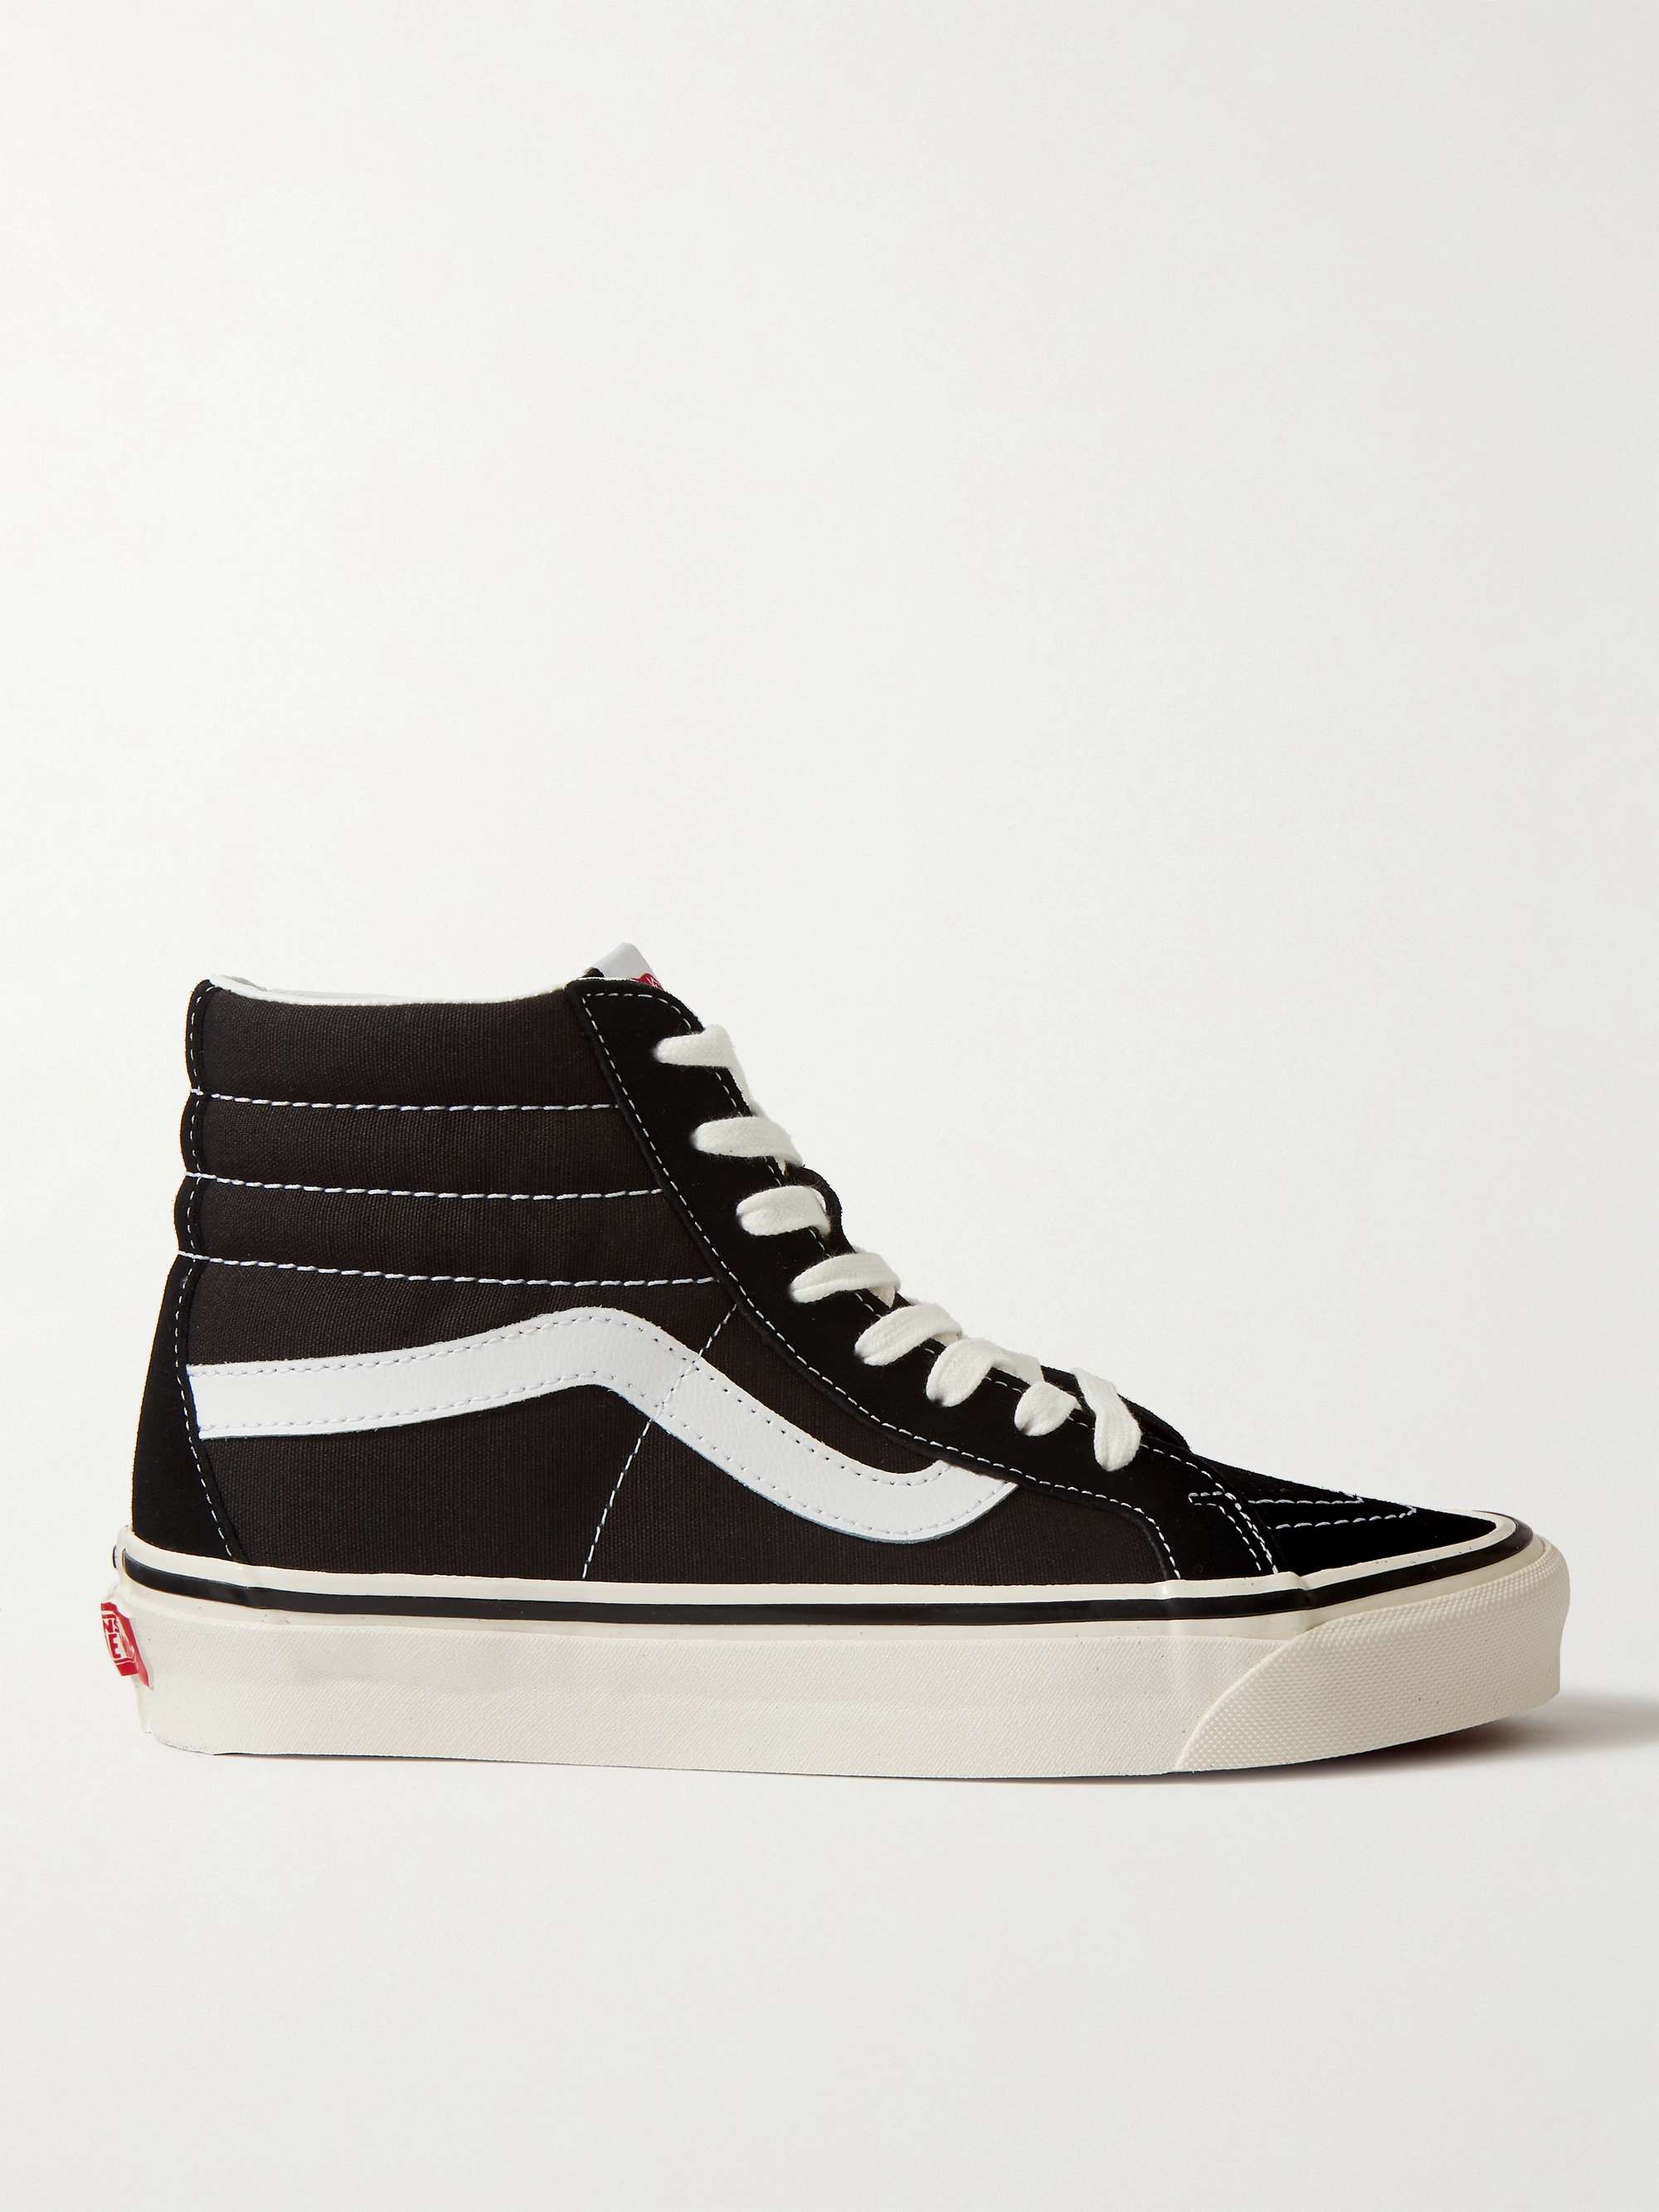 VANS SK8-HI Leather-Trimmed Suede and Canvas High-Top Sneakers | MR PORTER